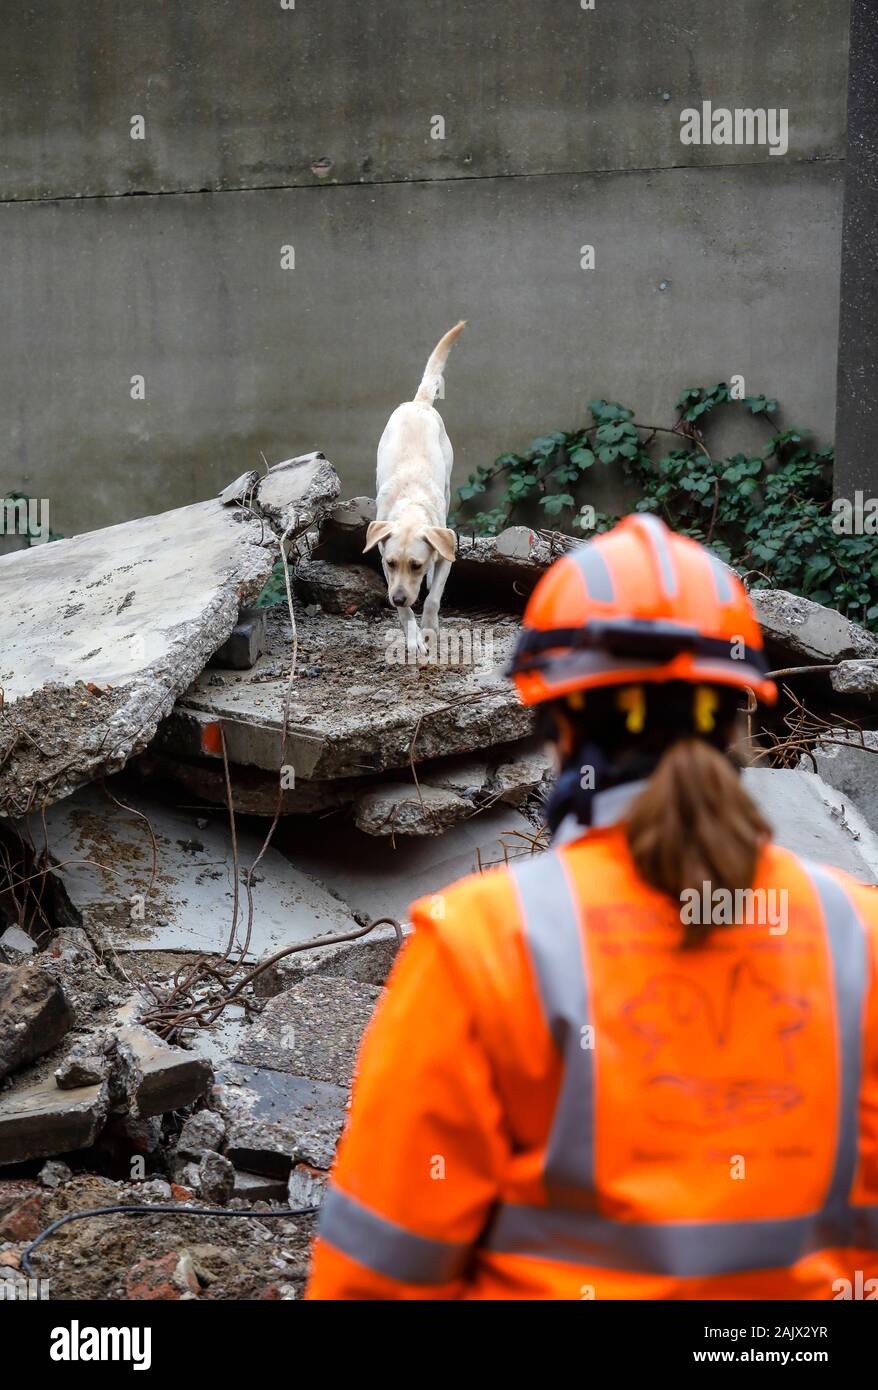 Herne, North Rhine-Westphalia, Germany - Rescue dog training, in ruins of collapsed buildings, the tracking dogs practice the search for injured, buri Stock Photo